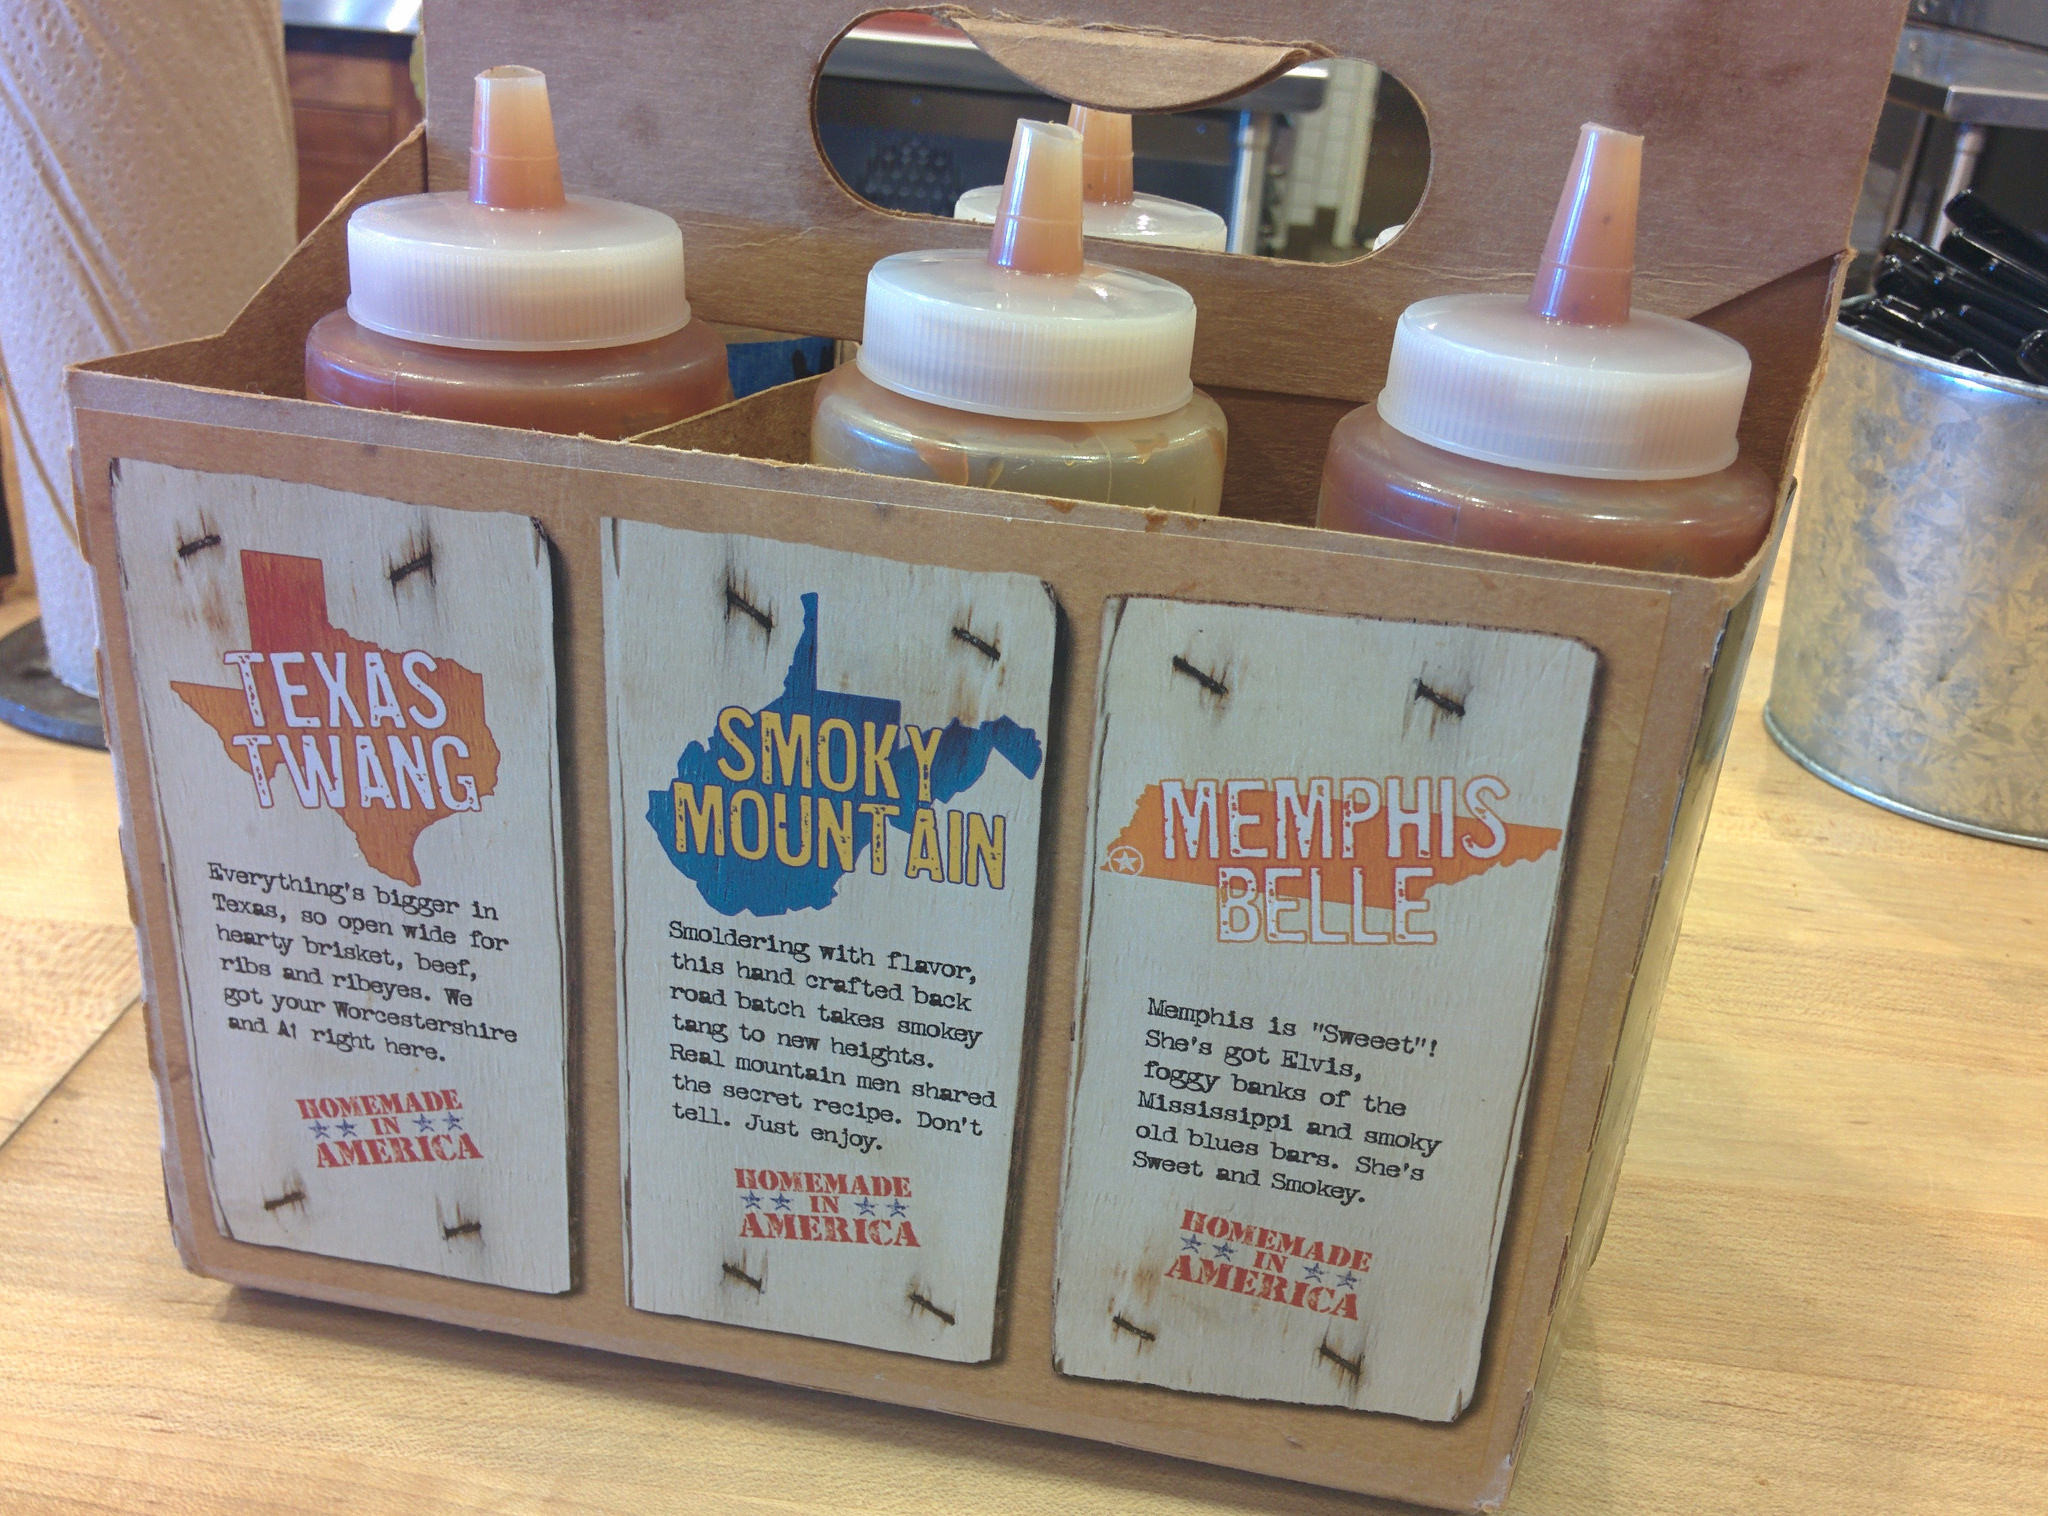 Mission Bbq Sauces
 [Columbia MD] Mission BBQ Awesome food and vision but